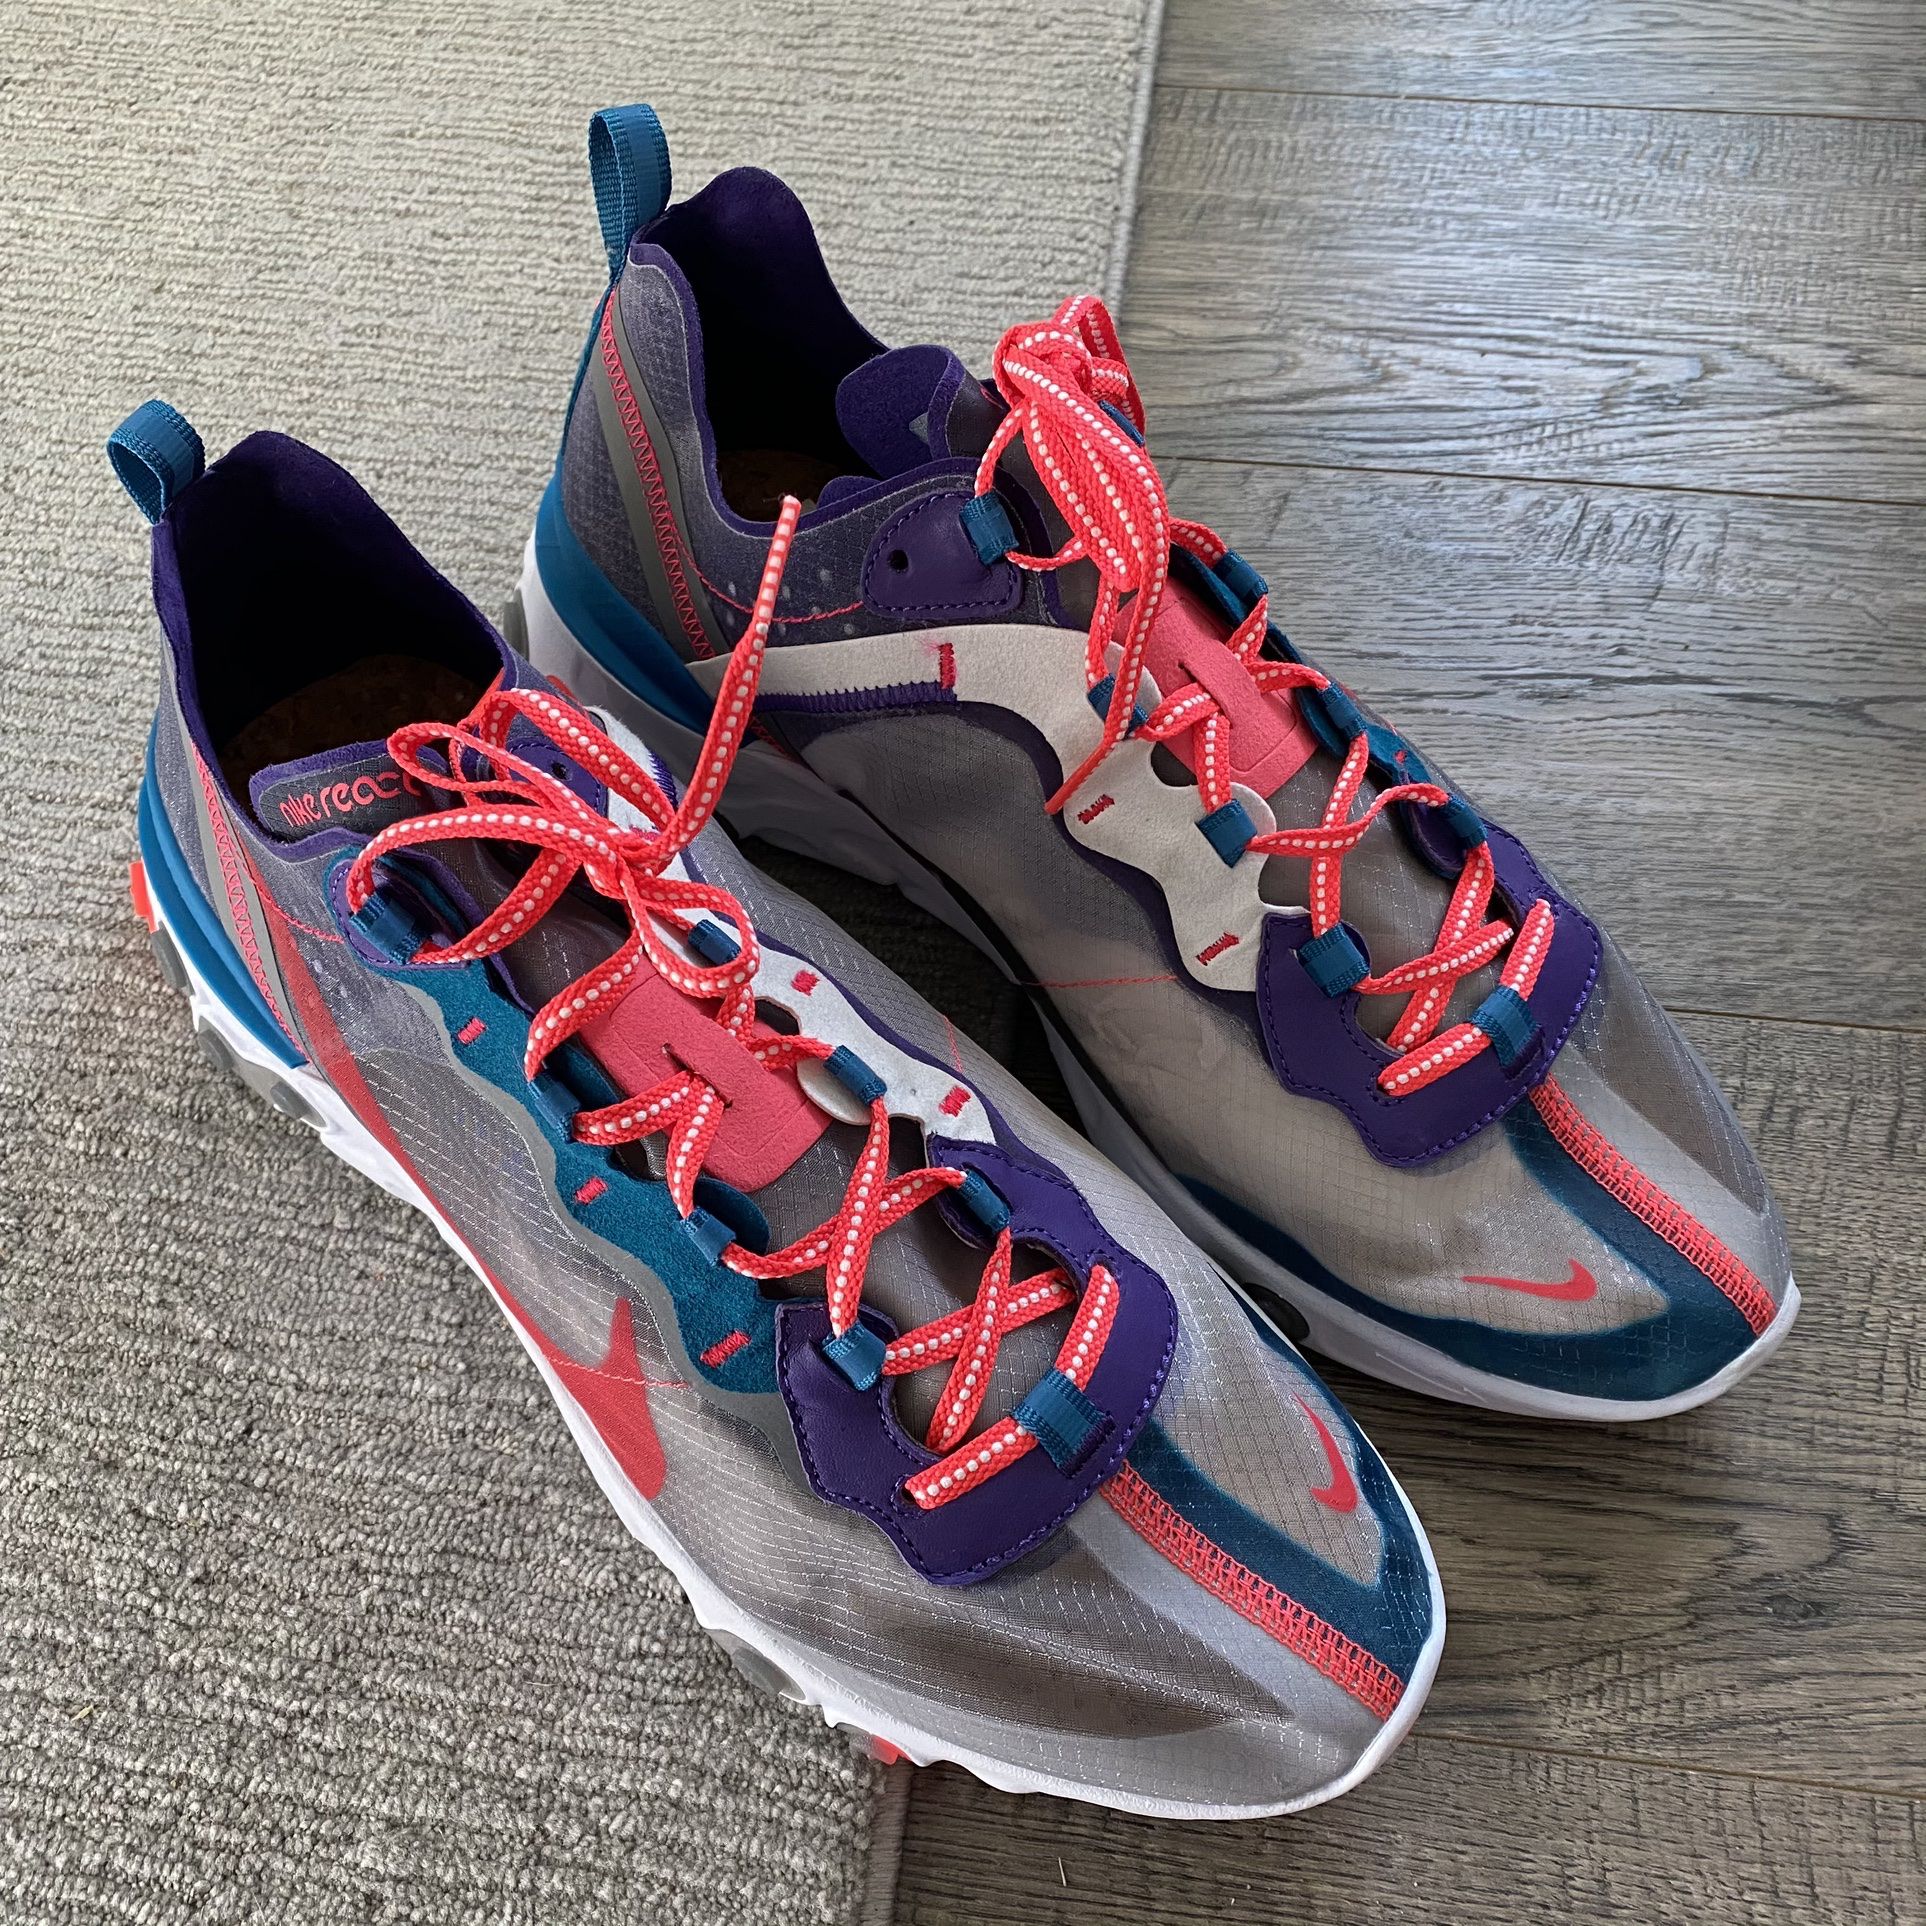 NEW AUTHENTIC NIKE REACT ELEMENT "'RED ORBIT" US 12 Sale in Escondido, CA - OfferUp